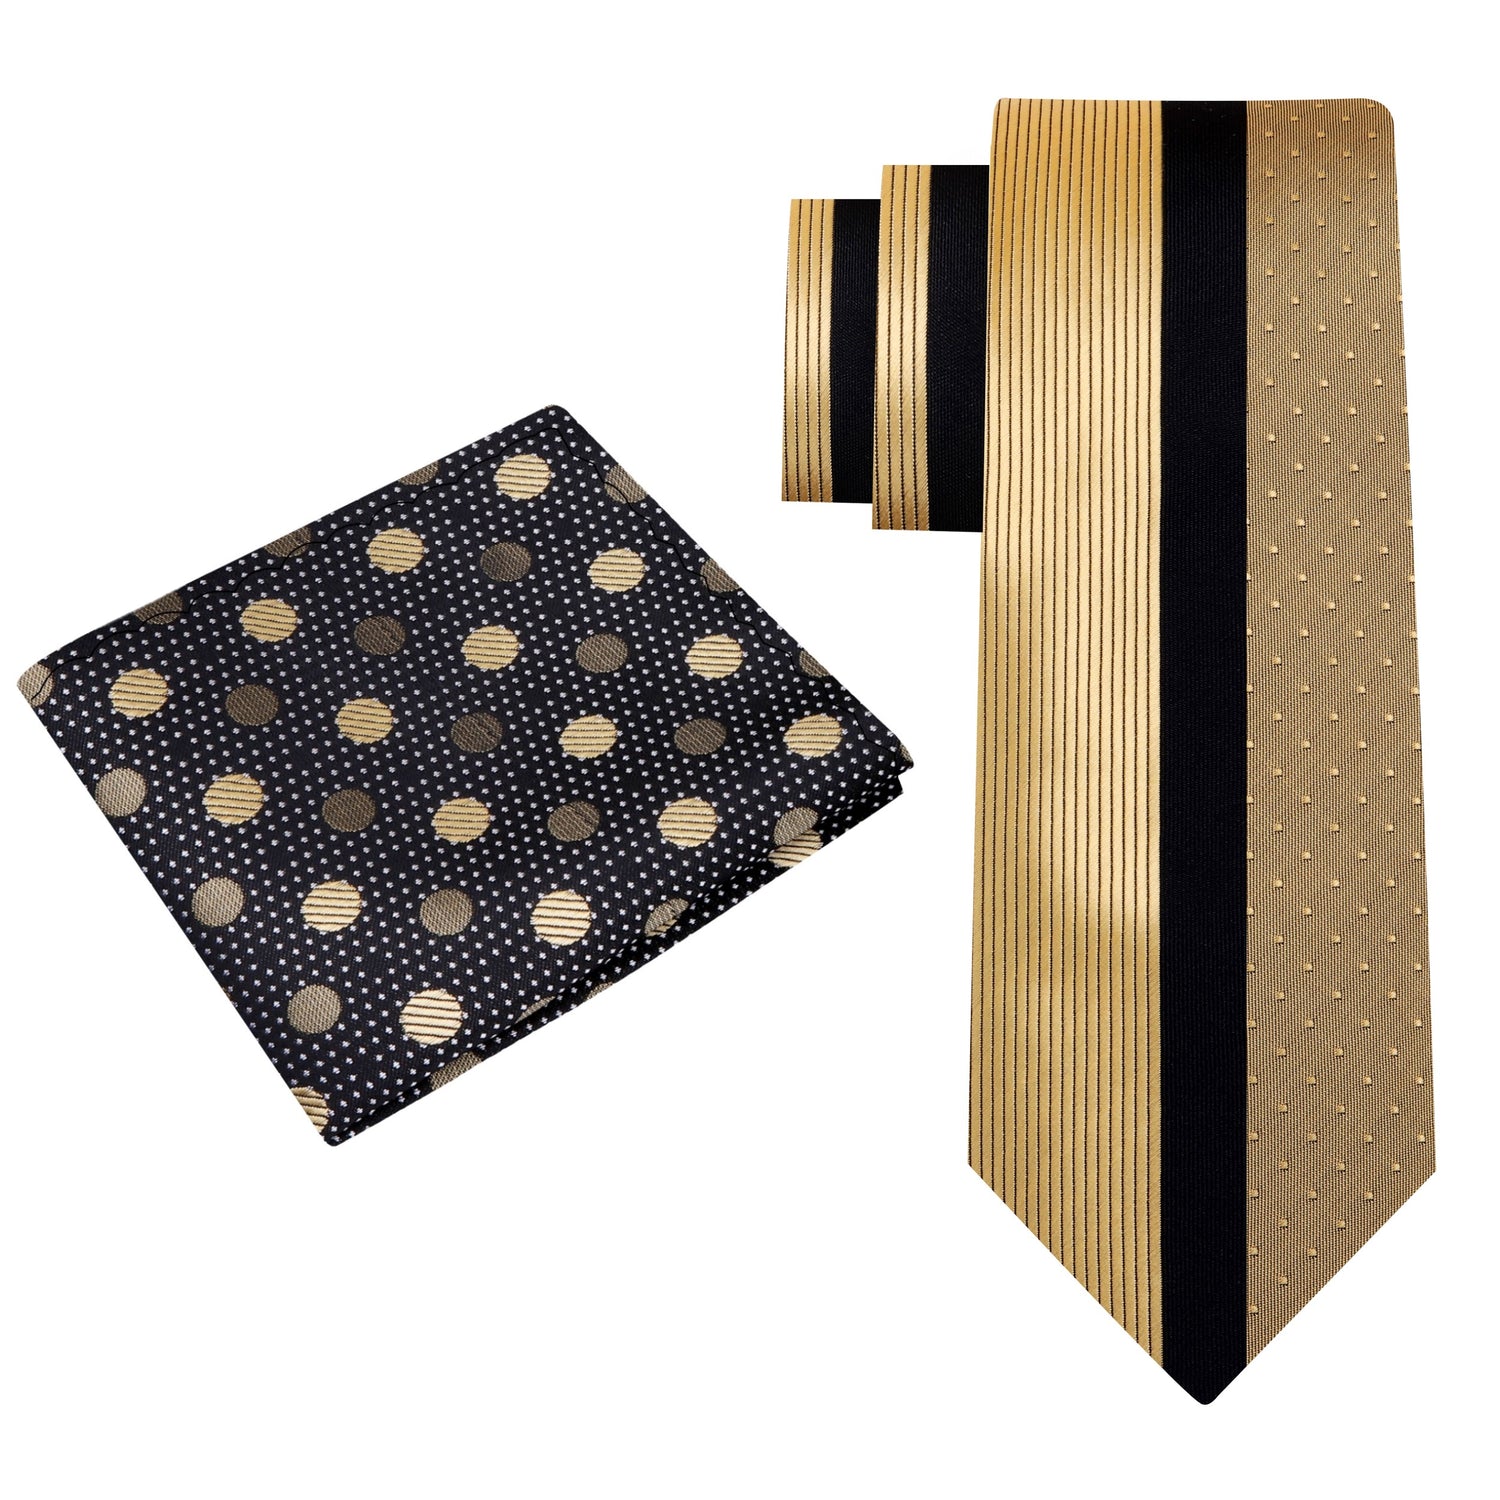 Alt View: Gold, Black Tie and Accenting Square